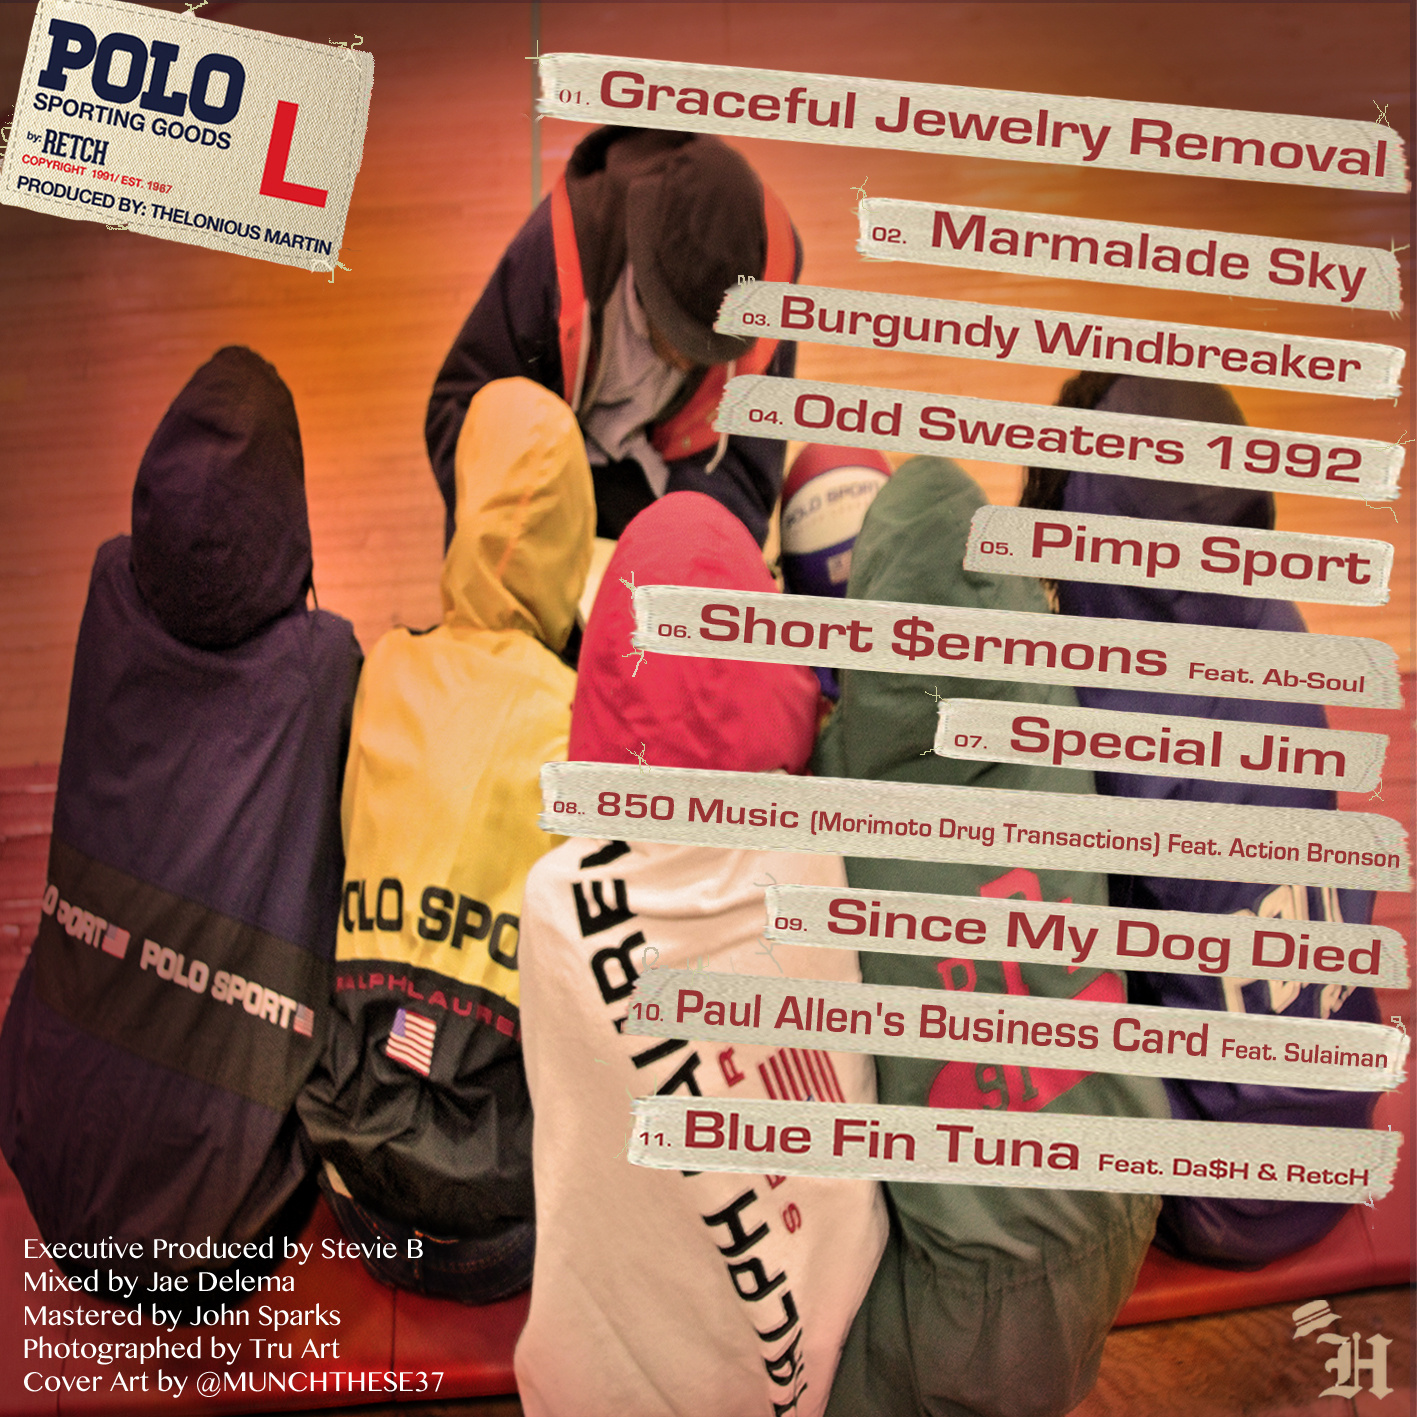 Retch & Thelonious Martin - "Polo Sporting Goods" (Release)